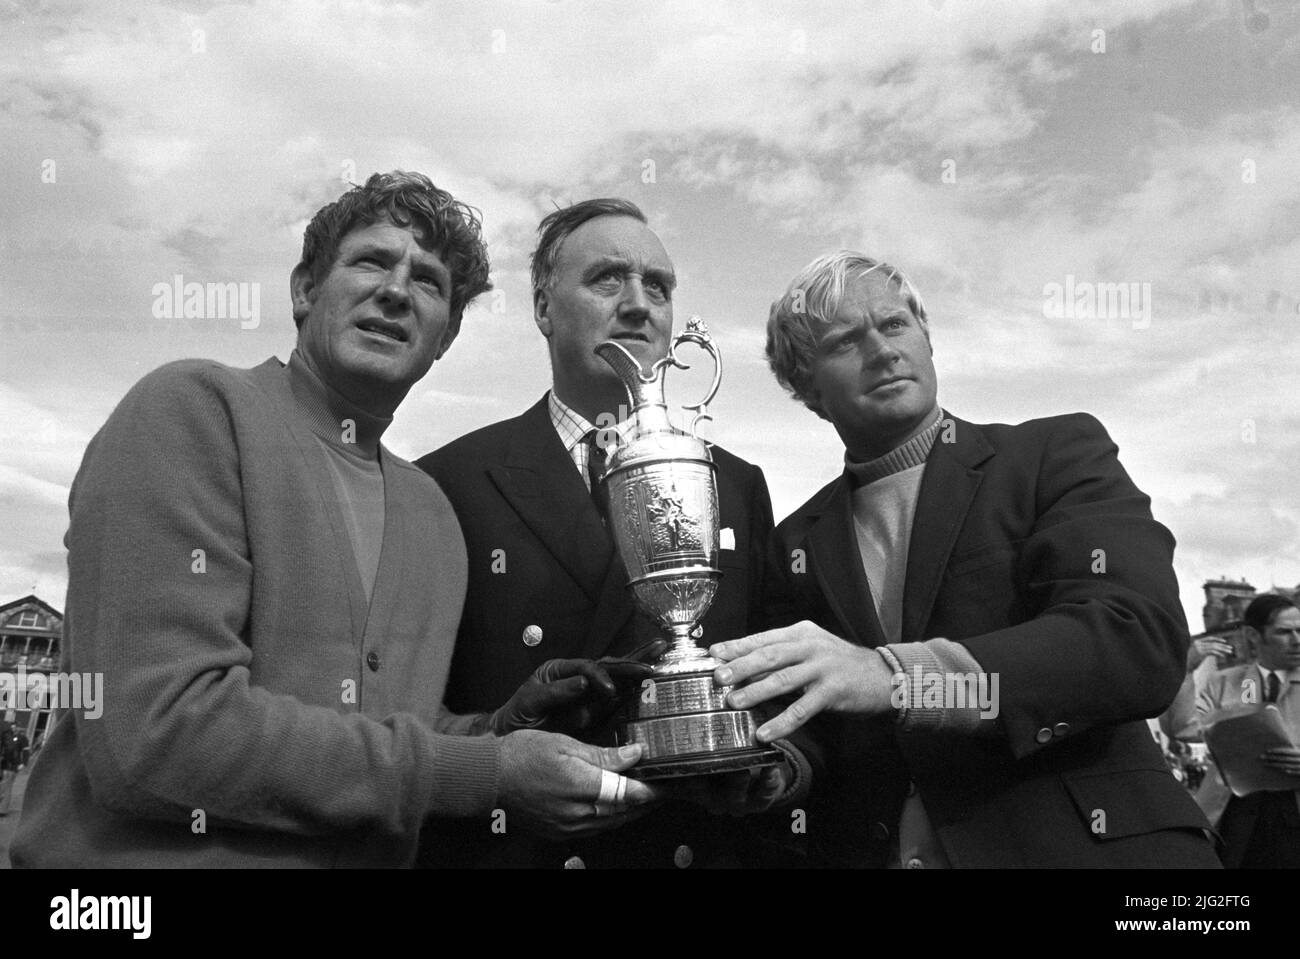 File photo dated 11-07-1970 of America's Doug Sanders (left) and Jack Nicklaus (right) with the Open Golf trophy they are sharing for a few hours. Between them is Cabinet Minister Mr William Whitelaw, captain of the Royal and Ancient Golf Club. The winner will be decided tomorrow when Sanders and Nicklaus play off over 18 holes. After saving par from the Road Hole bunker in the final round, Sanders needed to par the 18th to finish a shot ahead of Jack Nicklaus and left himself with a short putt for the title. Standing over the ball, Sanders thought he saw a small pebble on his line and stooped Stock Photo